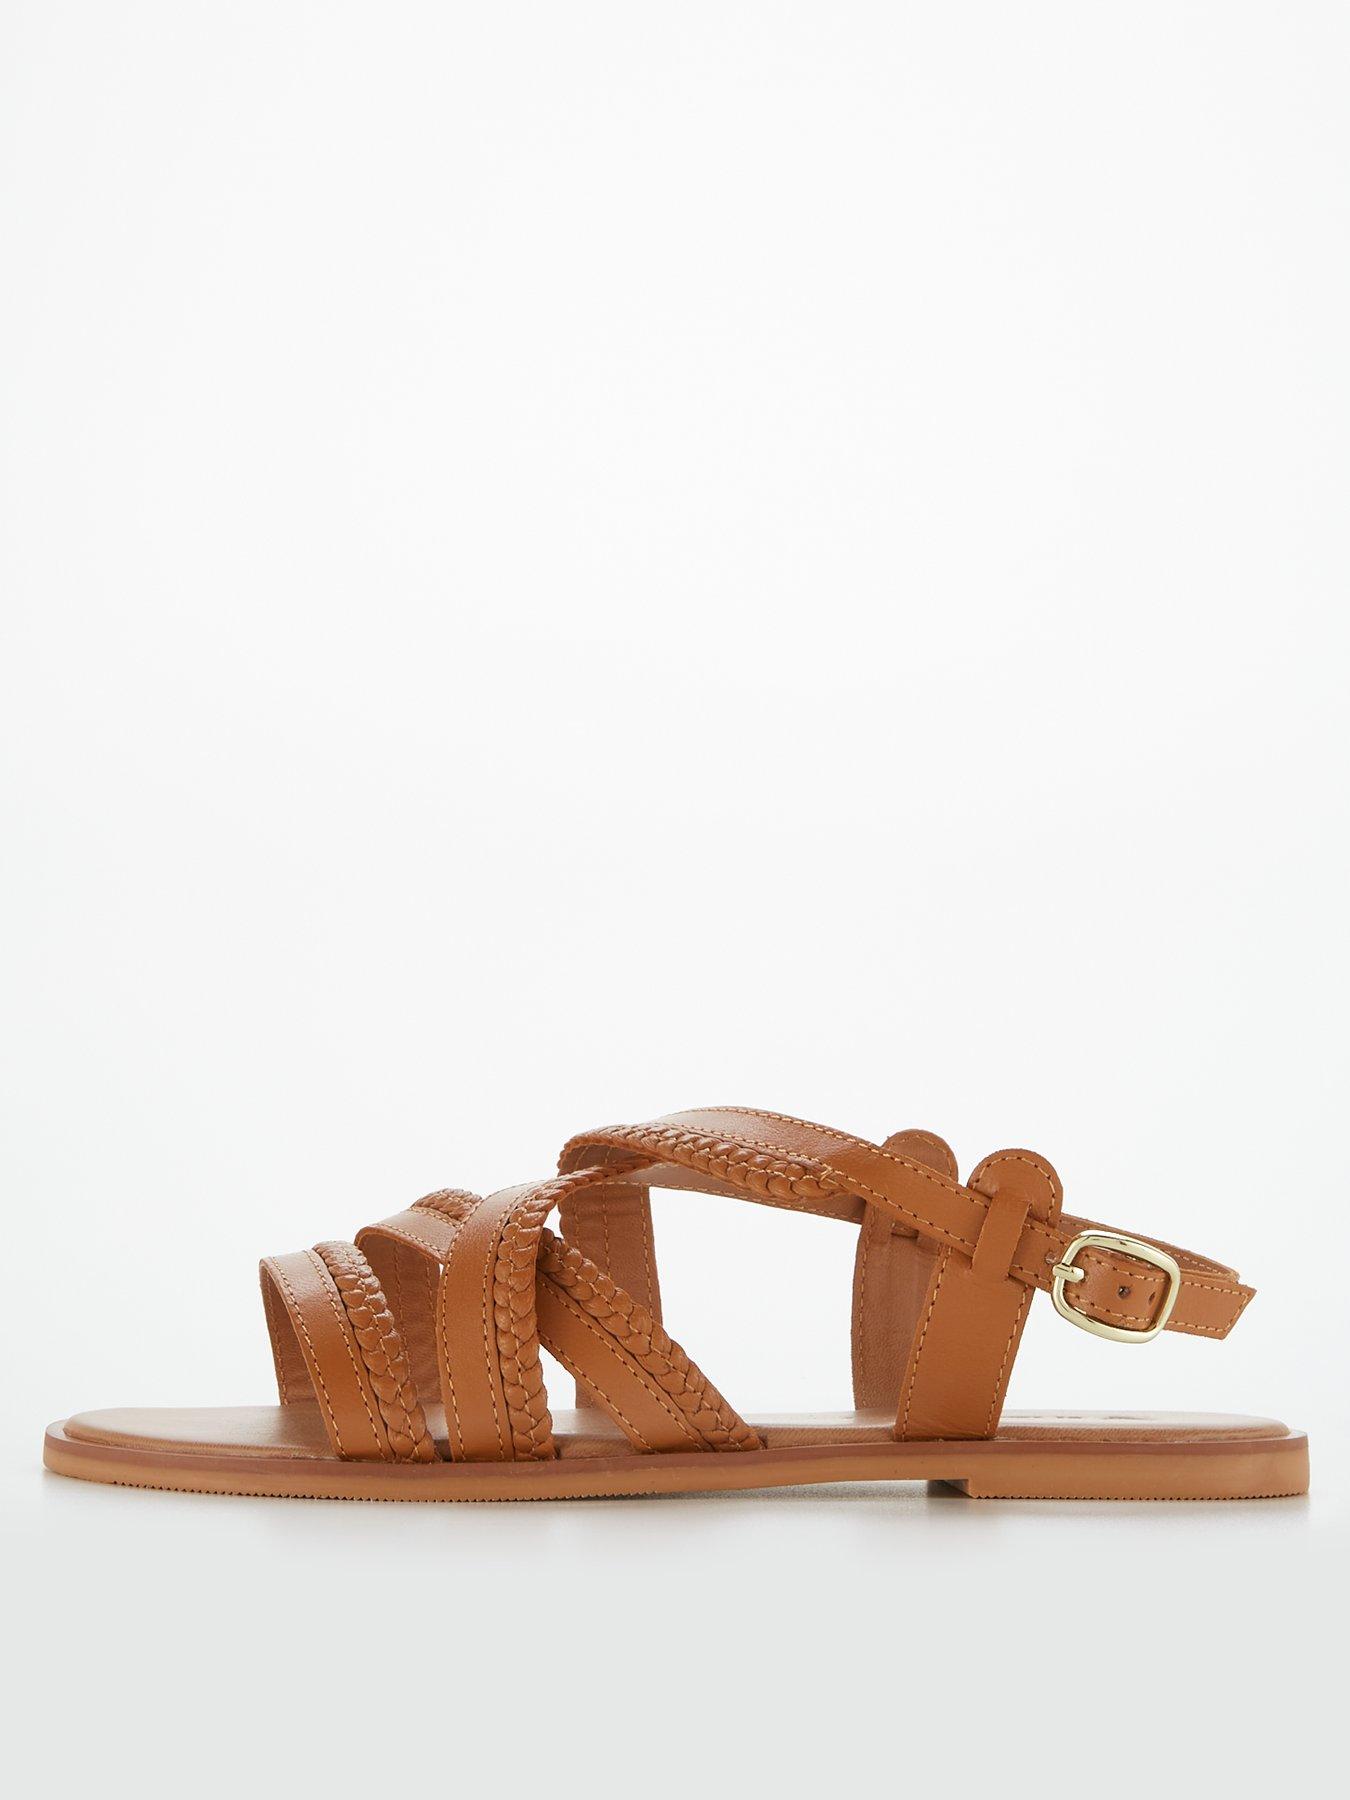 Shoes & boots Wide Fit Leather Strappy Sandal - Tan